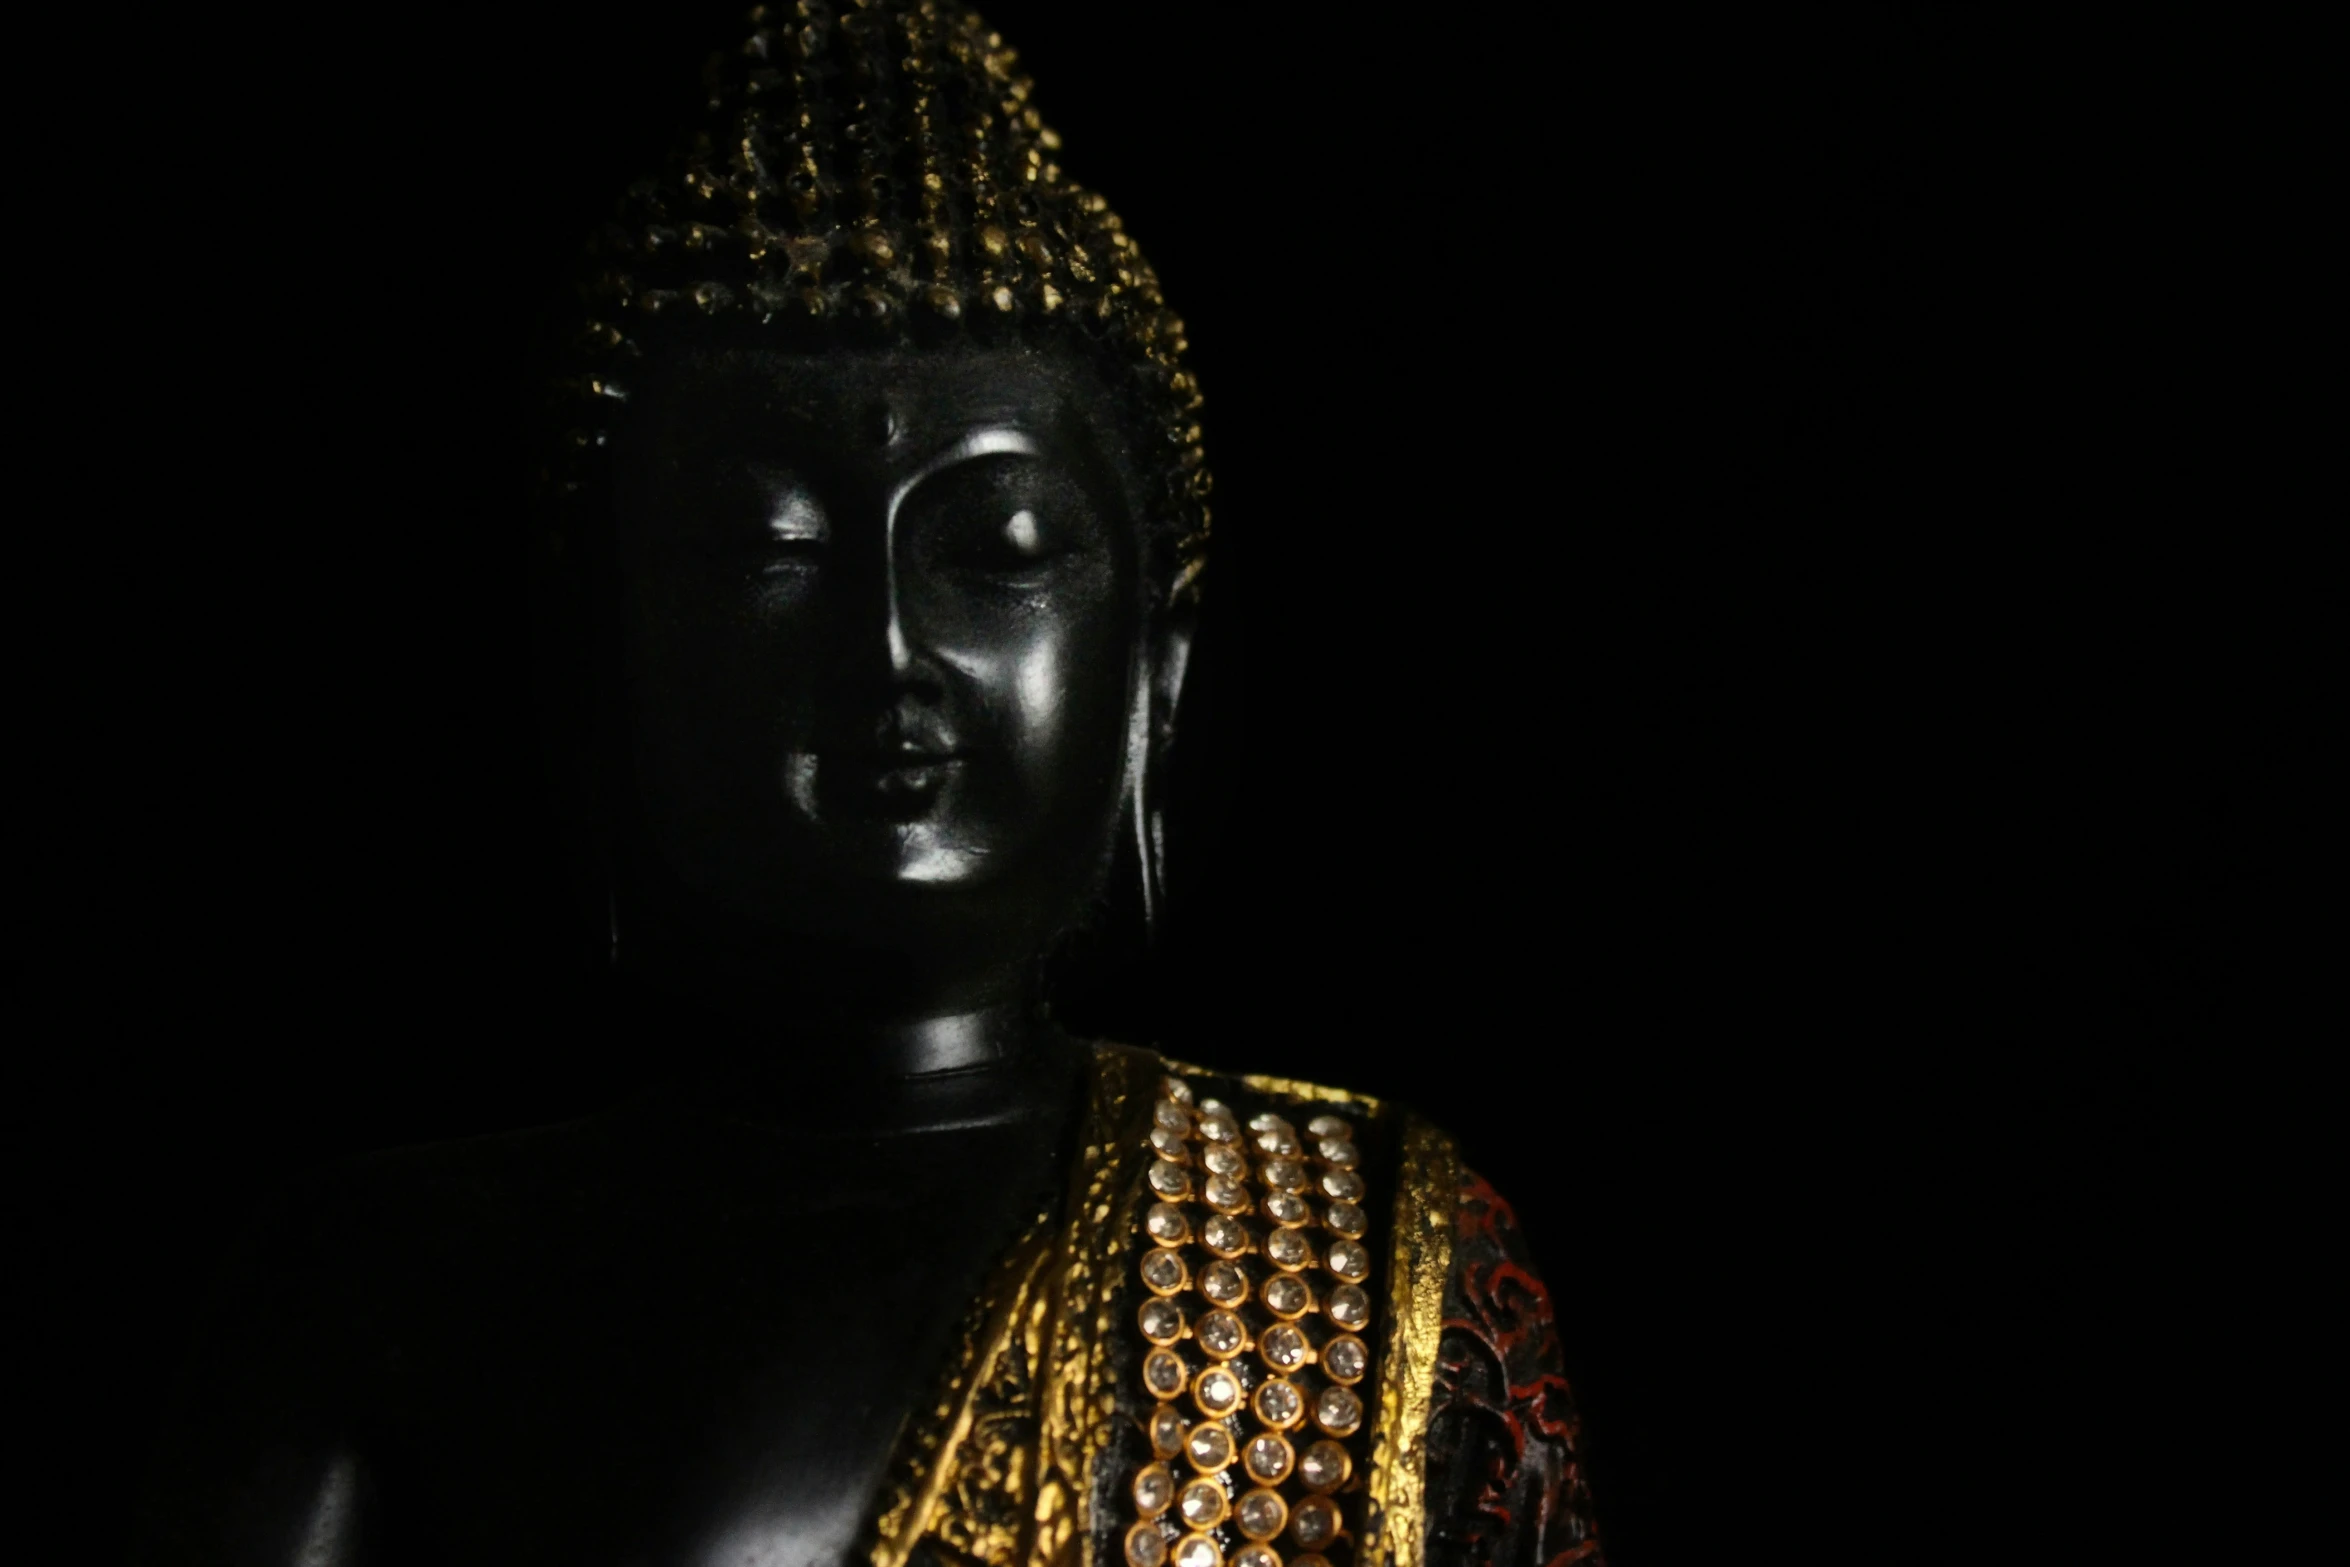 the buddha statue is wearing some beaded jewelry